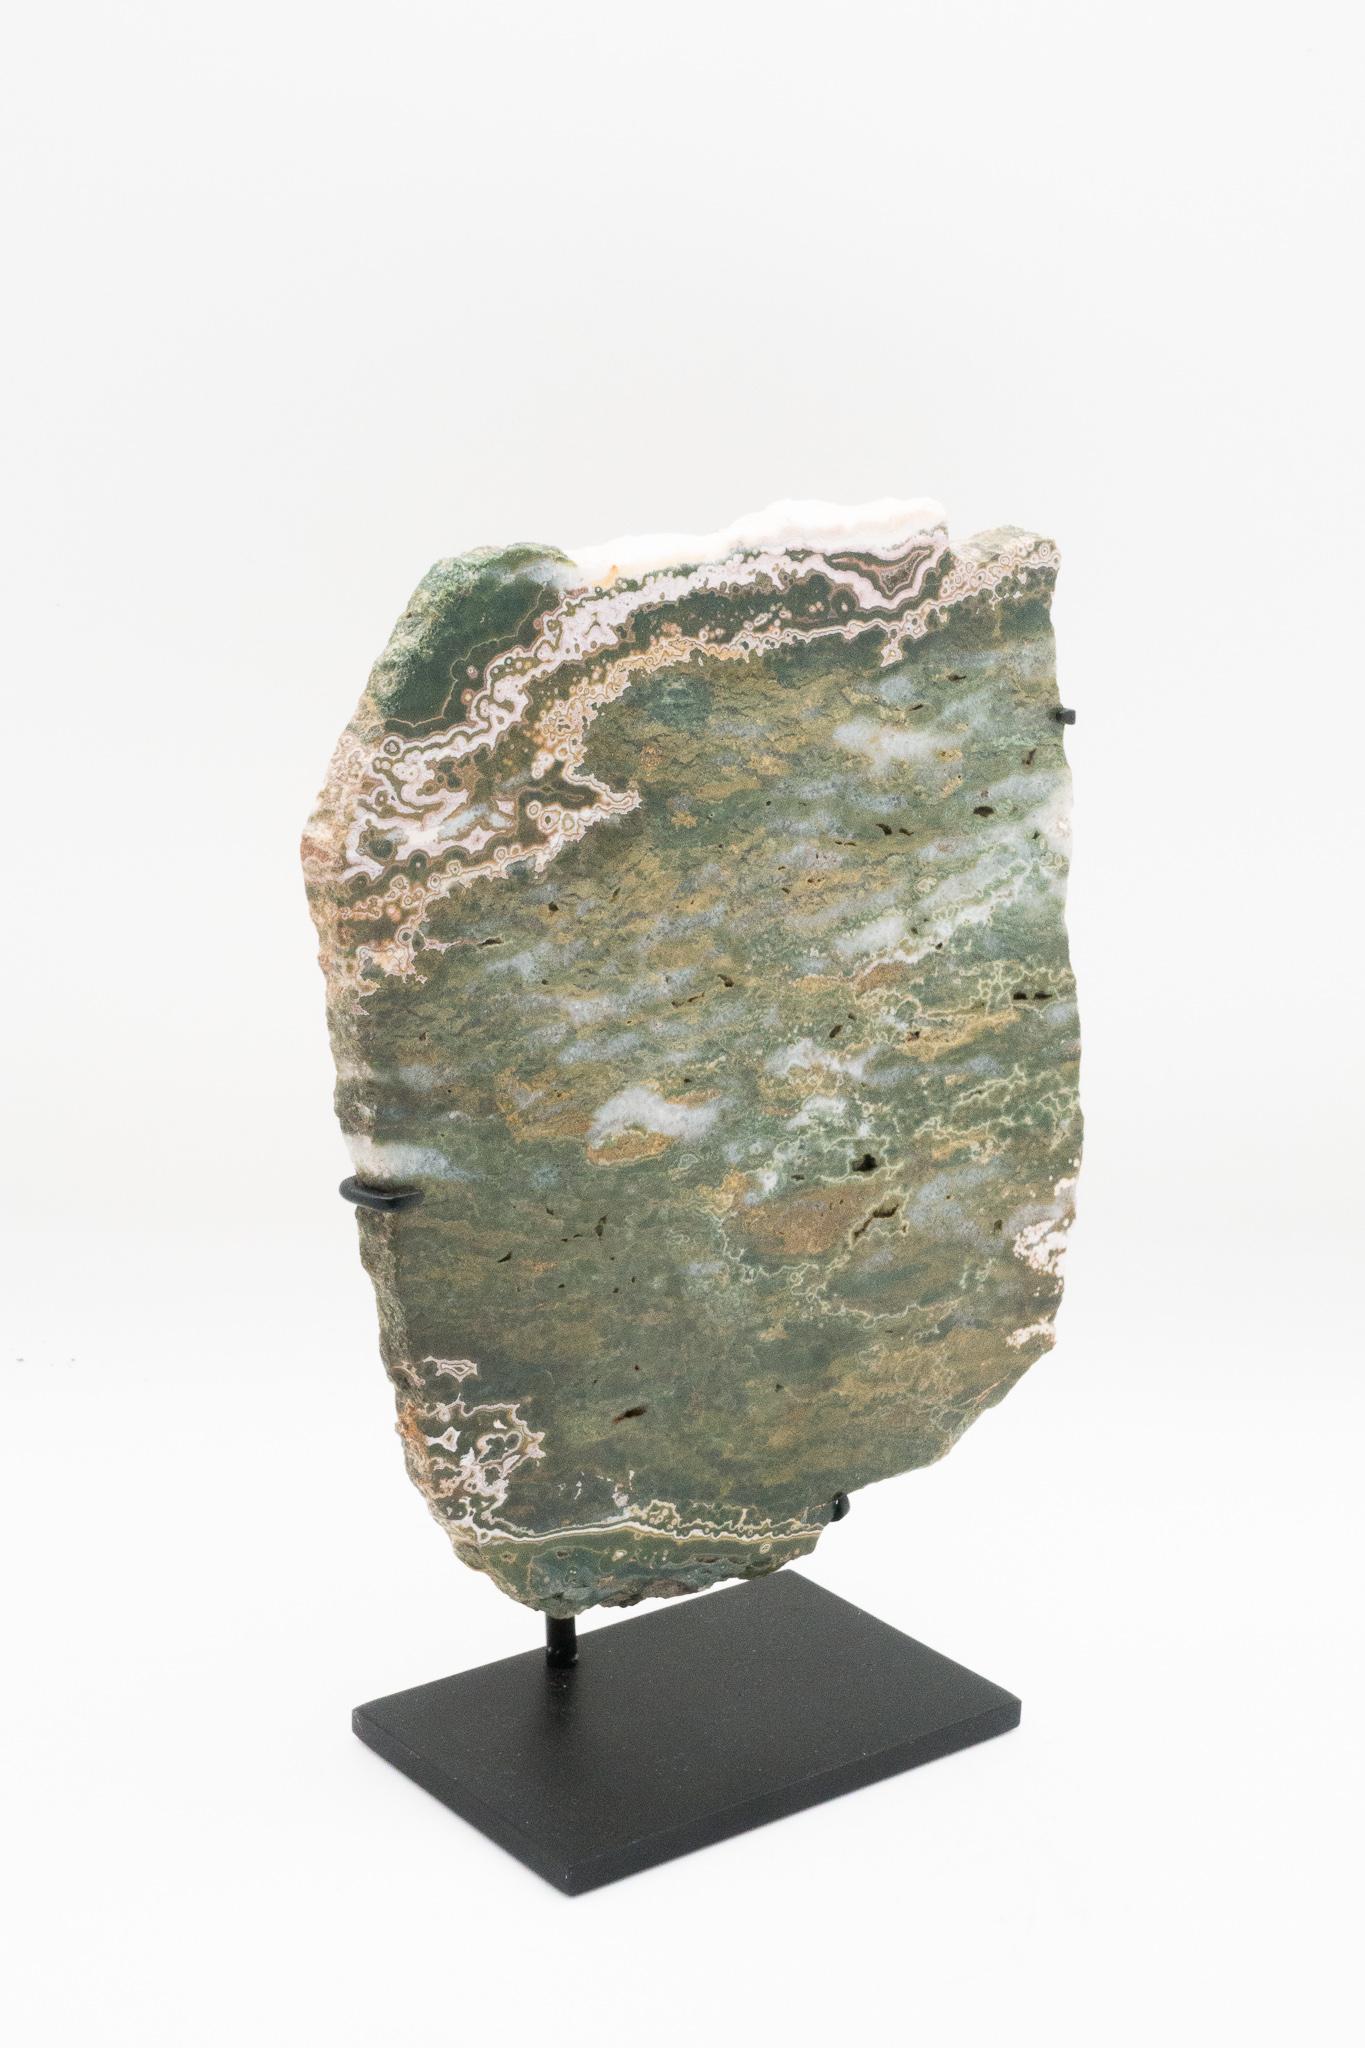 Ocean jasper specimen mounted on a black metal base. Ocean jasper, or snakeskin jasper, is a combination of chalcedony, microcrystalline quartz and other minerals, resulting in colorful bands and patterns.